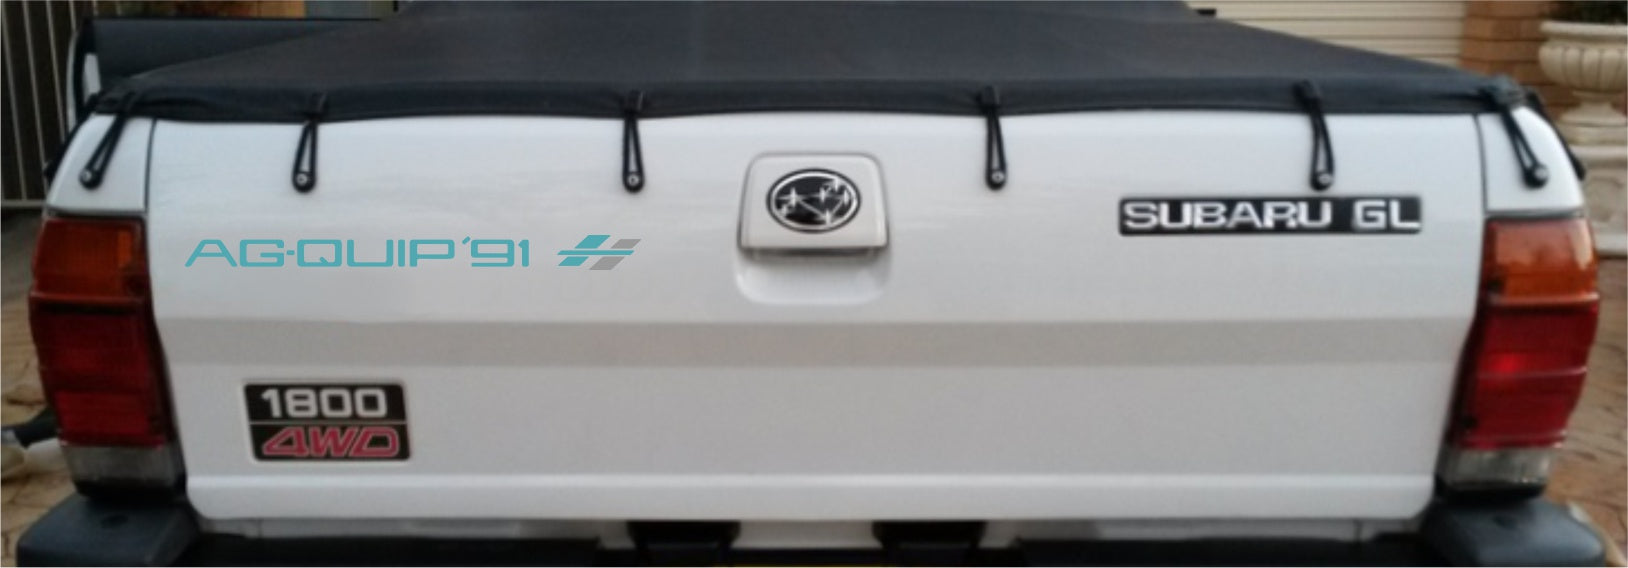 Brumby Ag-Quip 91 Teal Rear Tailgate